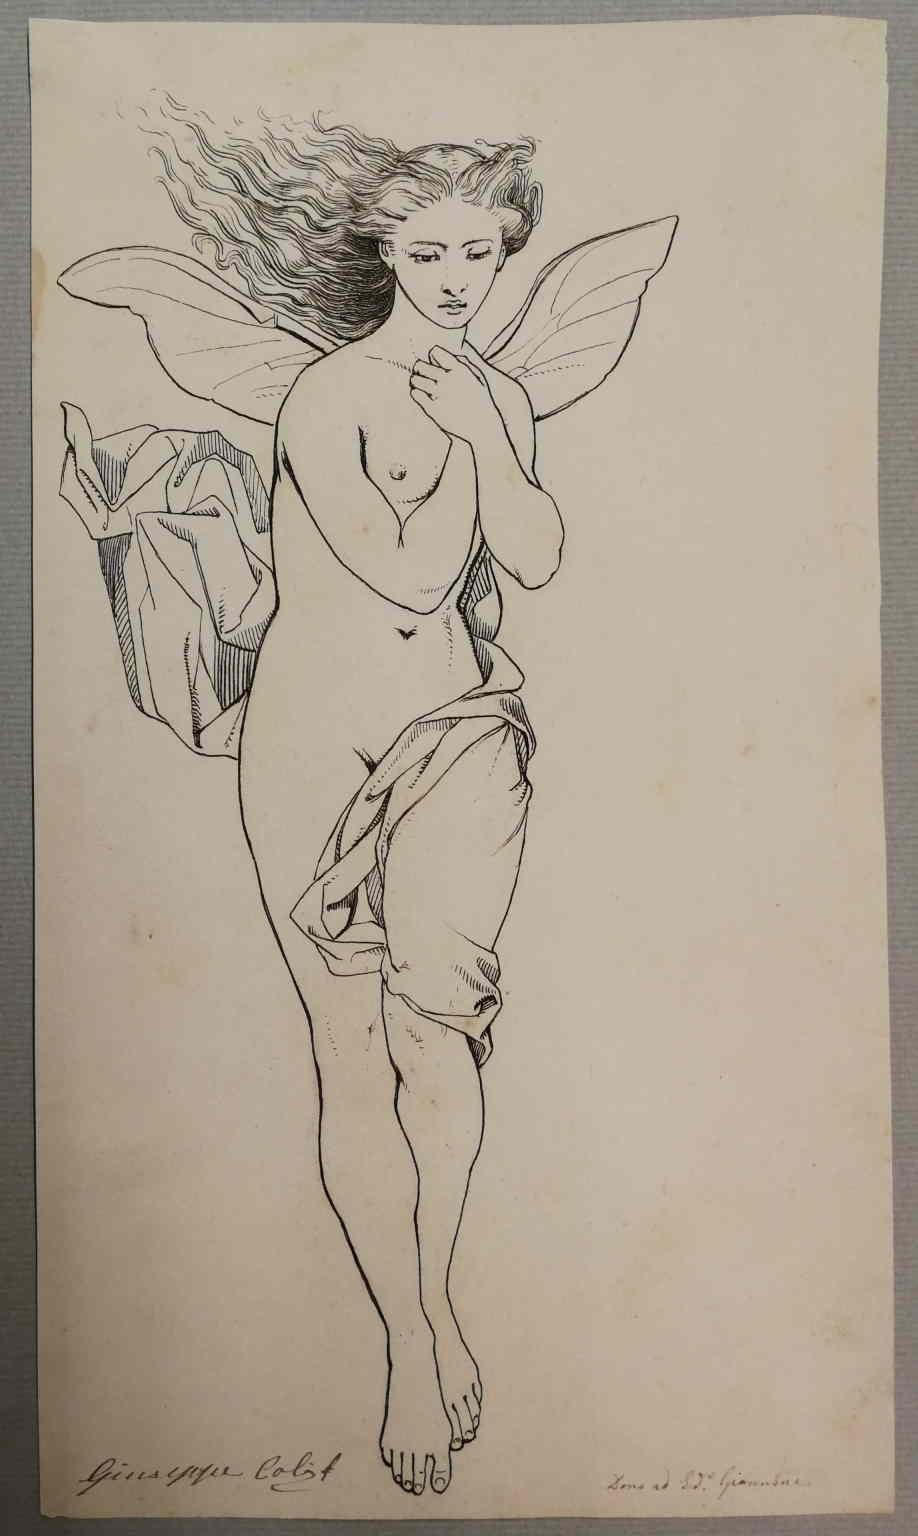 The drawing presumably represents Psyche when leaving the Underwolrd during one of the labours she had to pass through in order to be reunited with her love, Cupid.
It's signed on the bottom left "Giuseppe Calì f(ecit)" and on the right "Dono ad